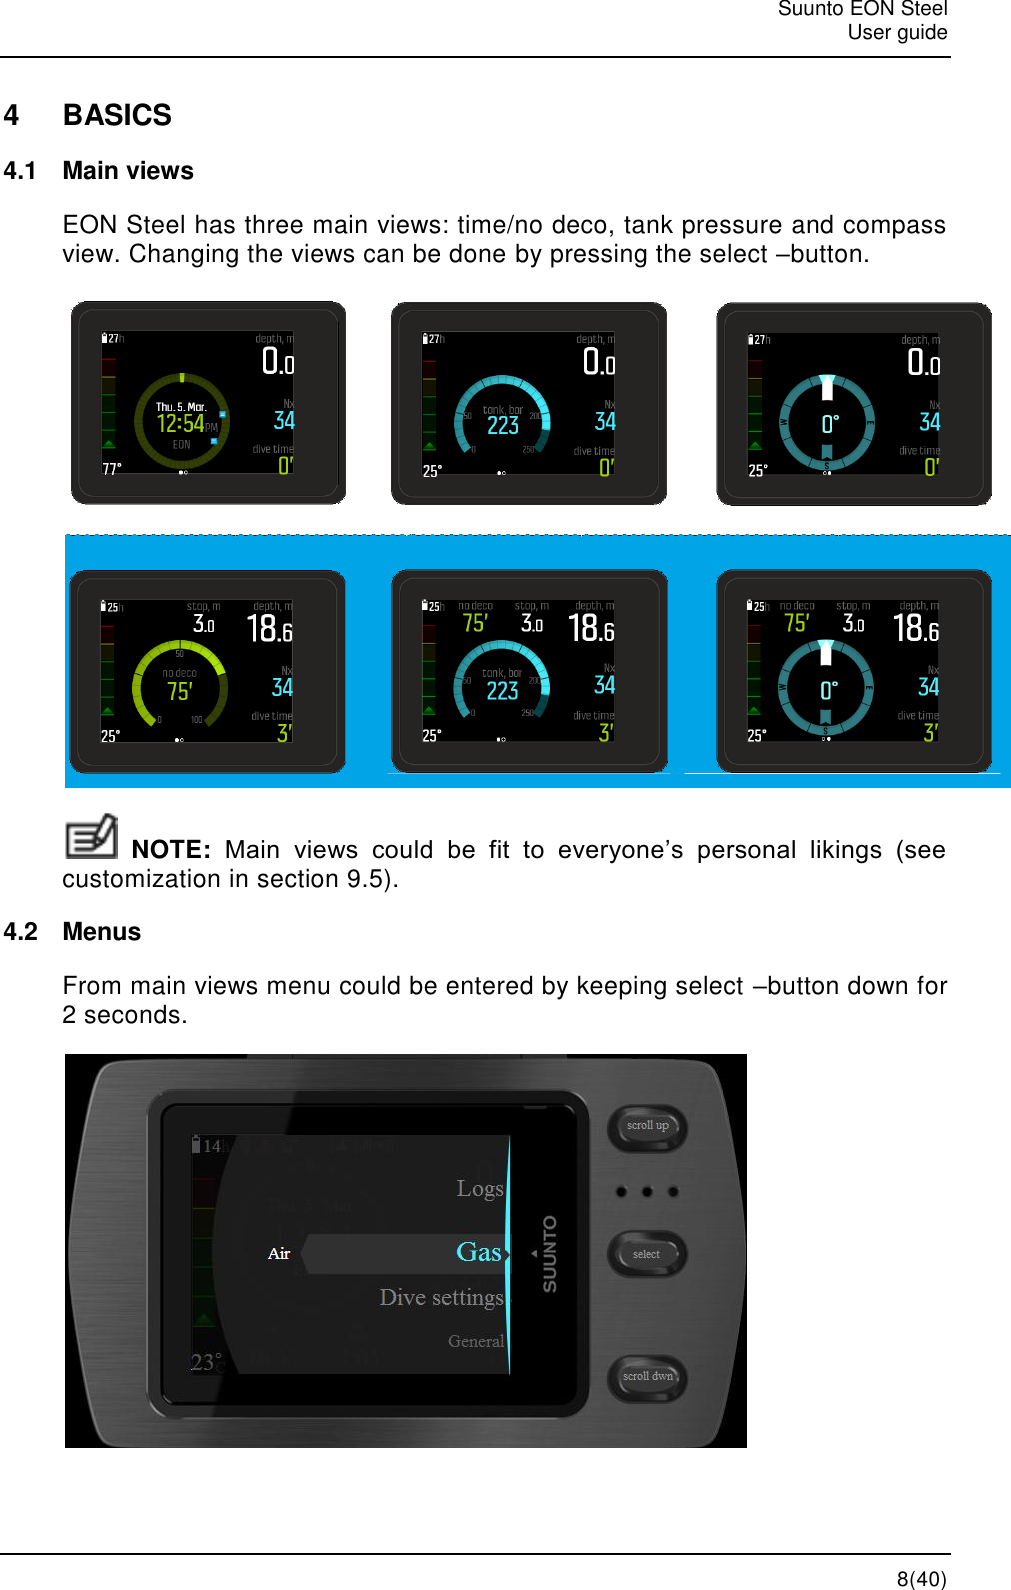   Suunto EON Steel   User guide   8(40) 4  BASICS 4.1  Main views EON Steel has three main views: time/no deco, tank pressure and compass view. Changing the views can be done by pressing the select –button.   NOTE: Main  views  could  be  fit  to  everyone’s  personal  likings  (see customization in section 9.5). 4.2  Menus From main views menu could be entered by keeping select –button down for 2 seconds.  